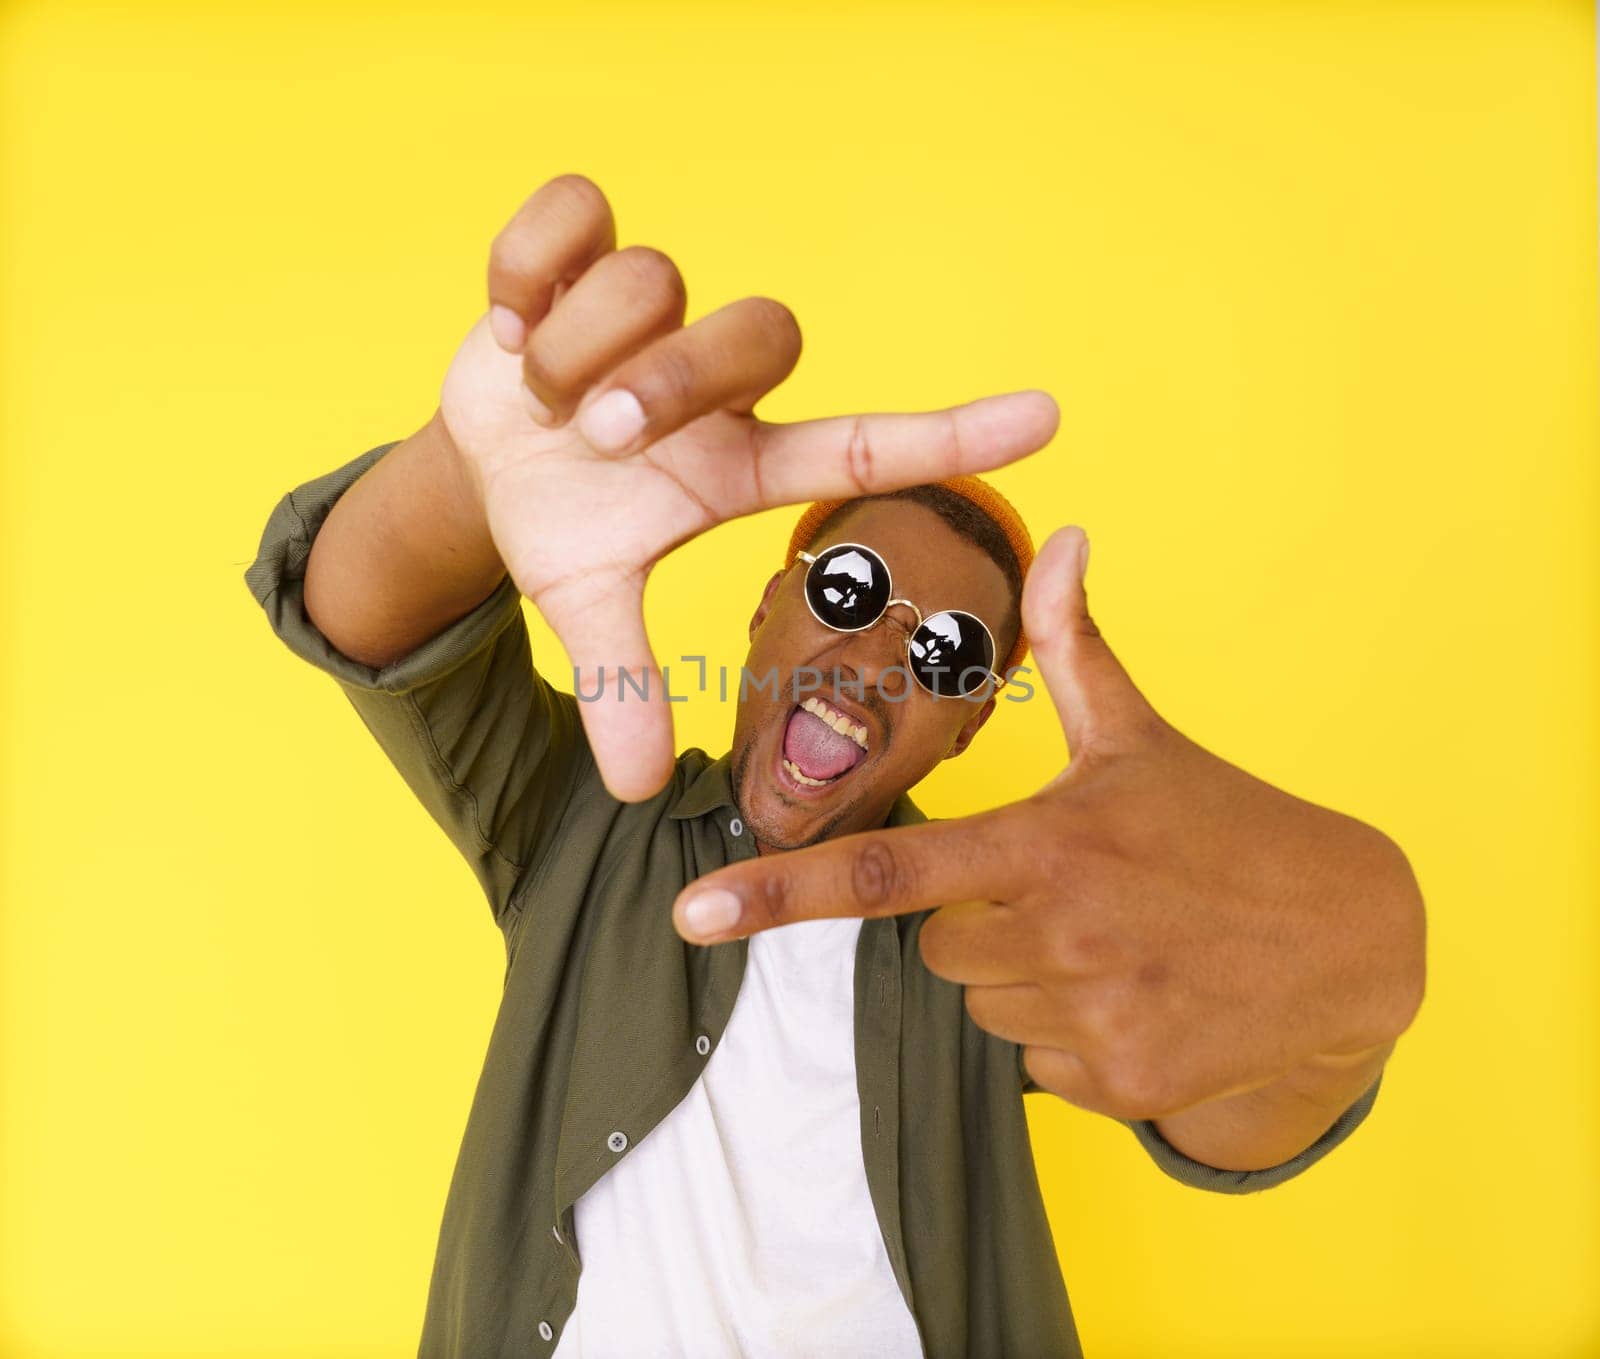 Creative young man on yellow background is seen making composition frame from his fingers, showcasing his artistic and imaginative abilities. Concept of innovation and inspiration, using hand gestures as non-verbal communication tool. High quality photo